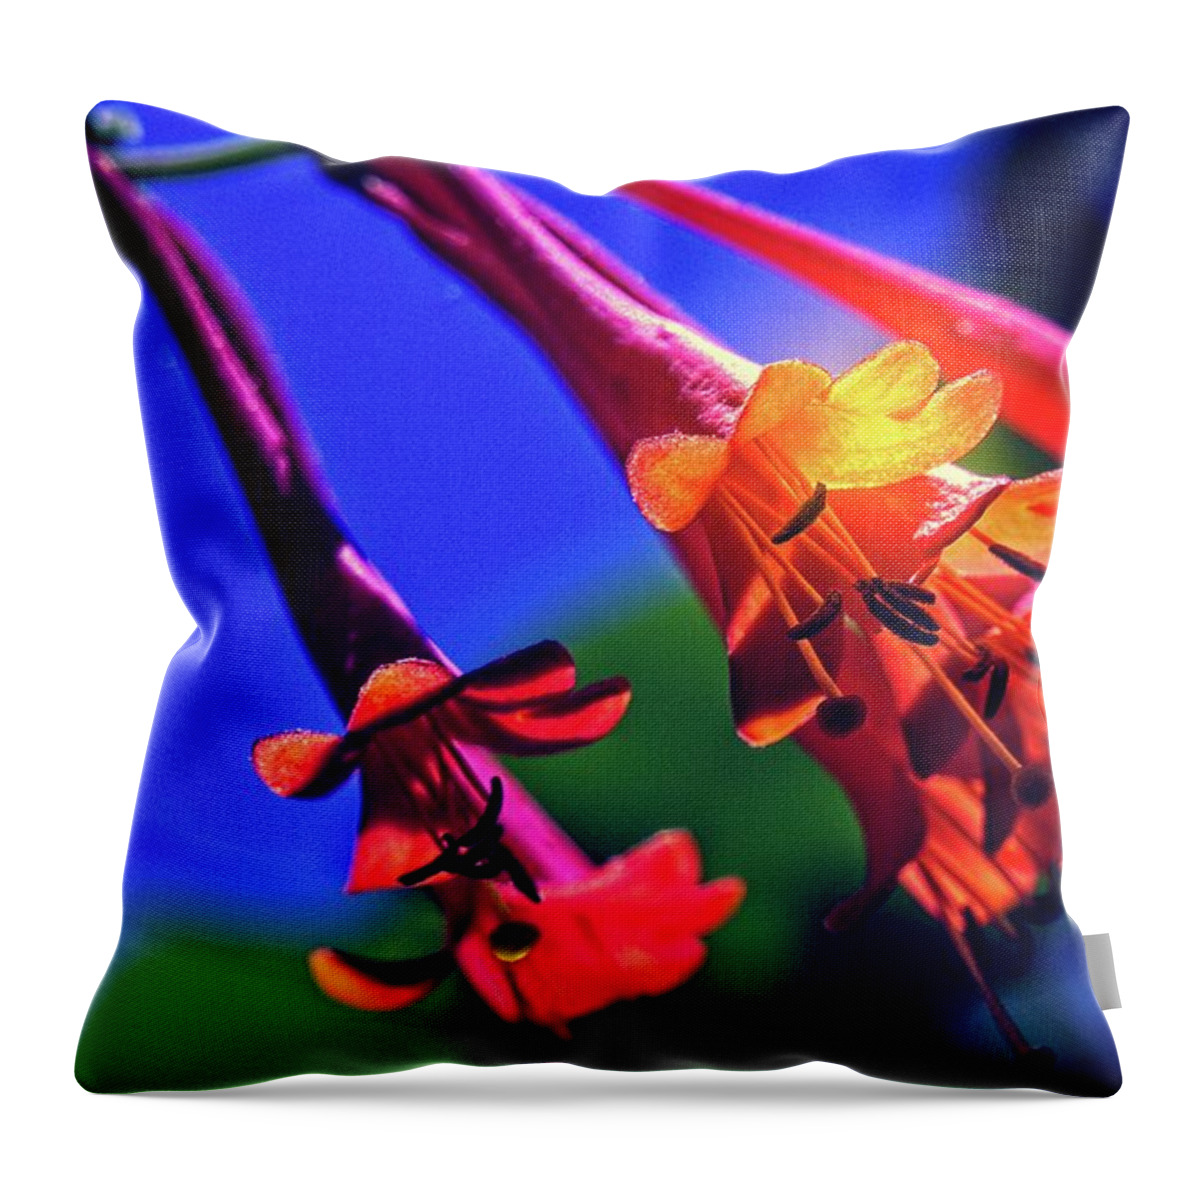 Abstract Throw Pillow featuring the photograph And The Horns Blared by David Desautel